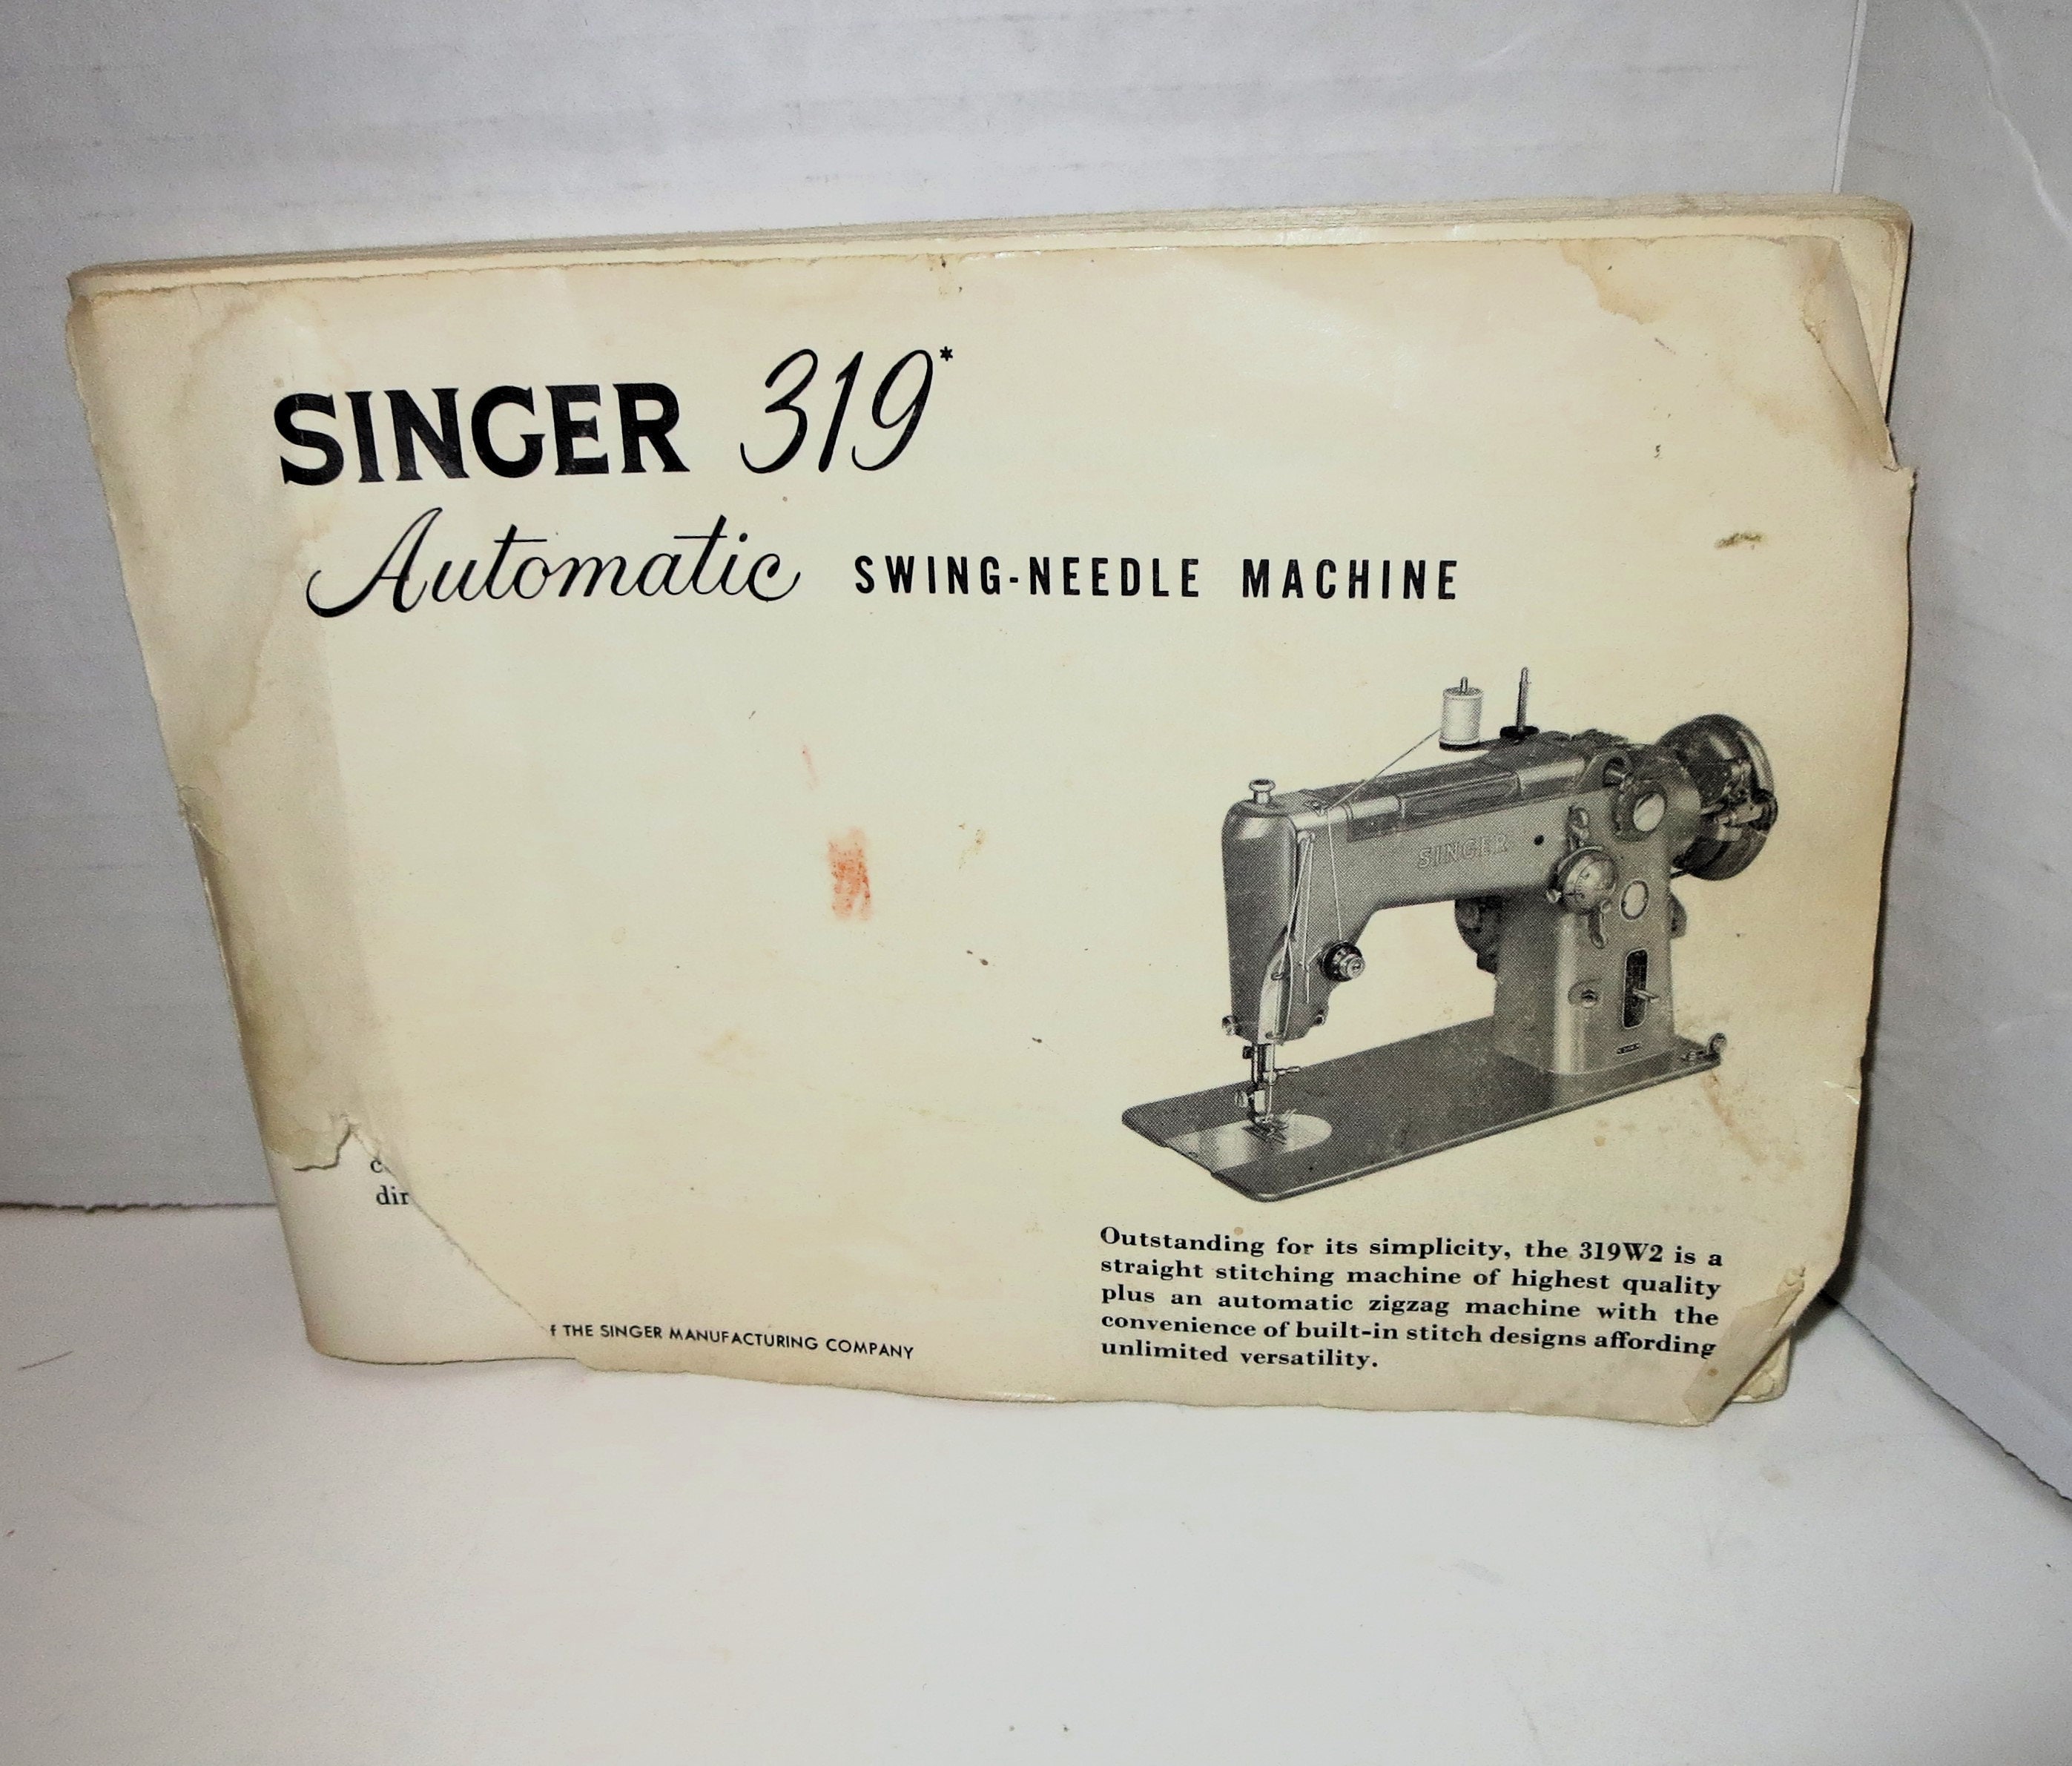 1957 SINGER SEWING CENTERS Sewing Machine Supplies Vintage Print Ad